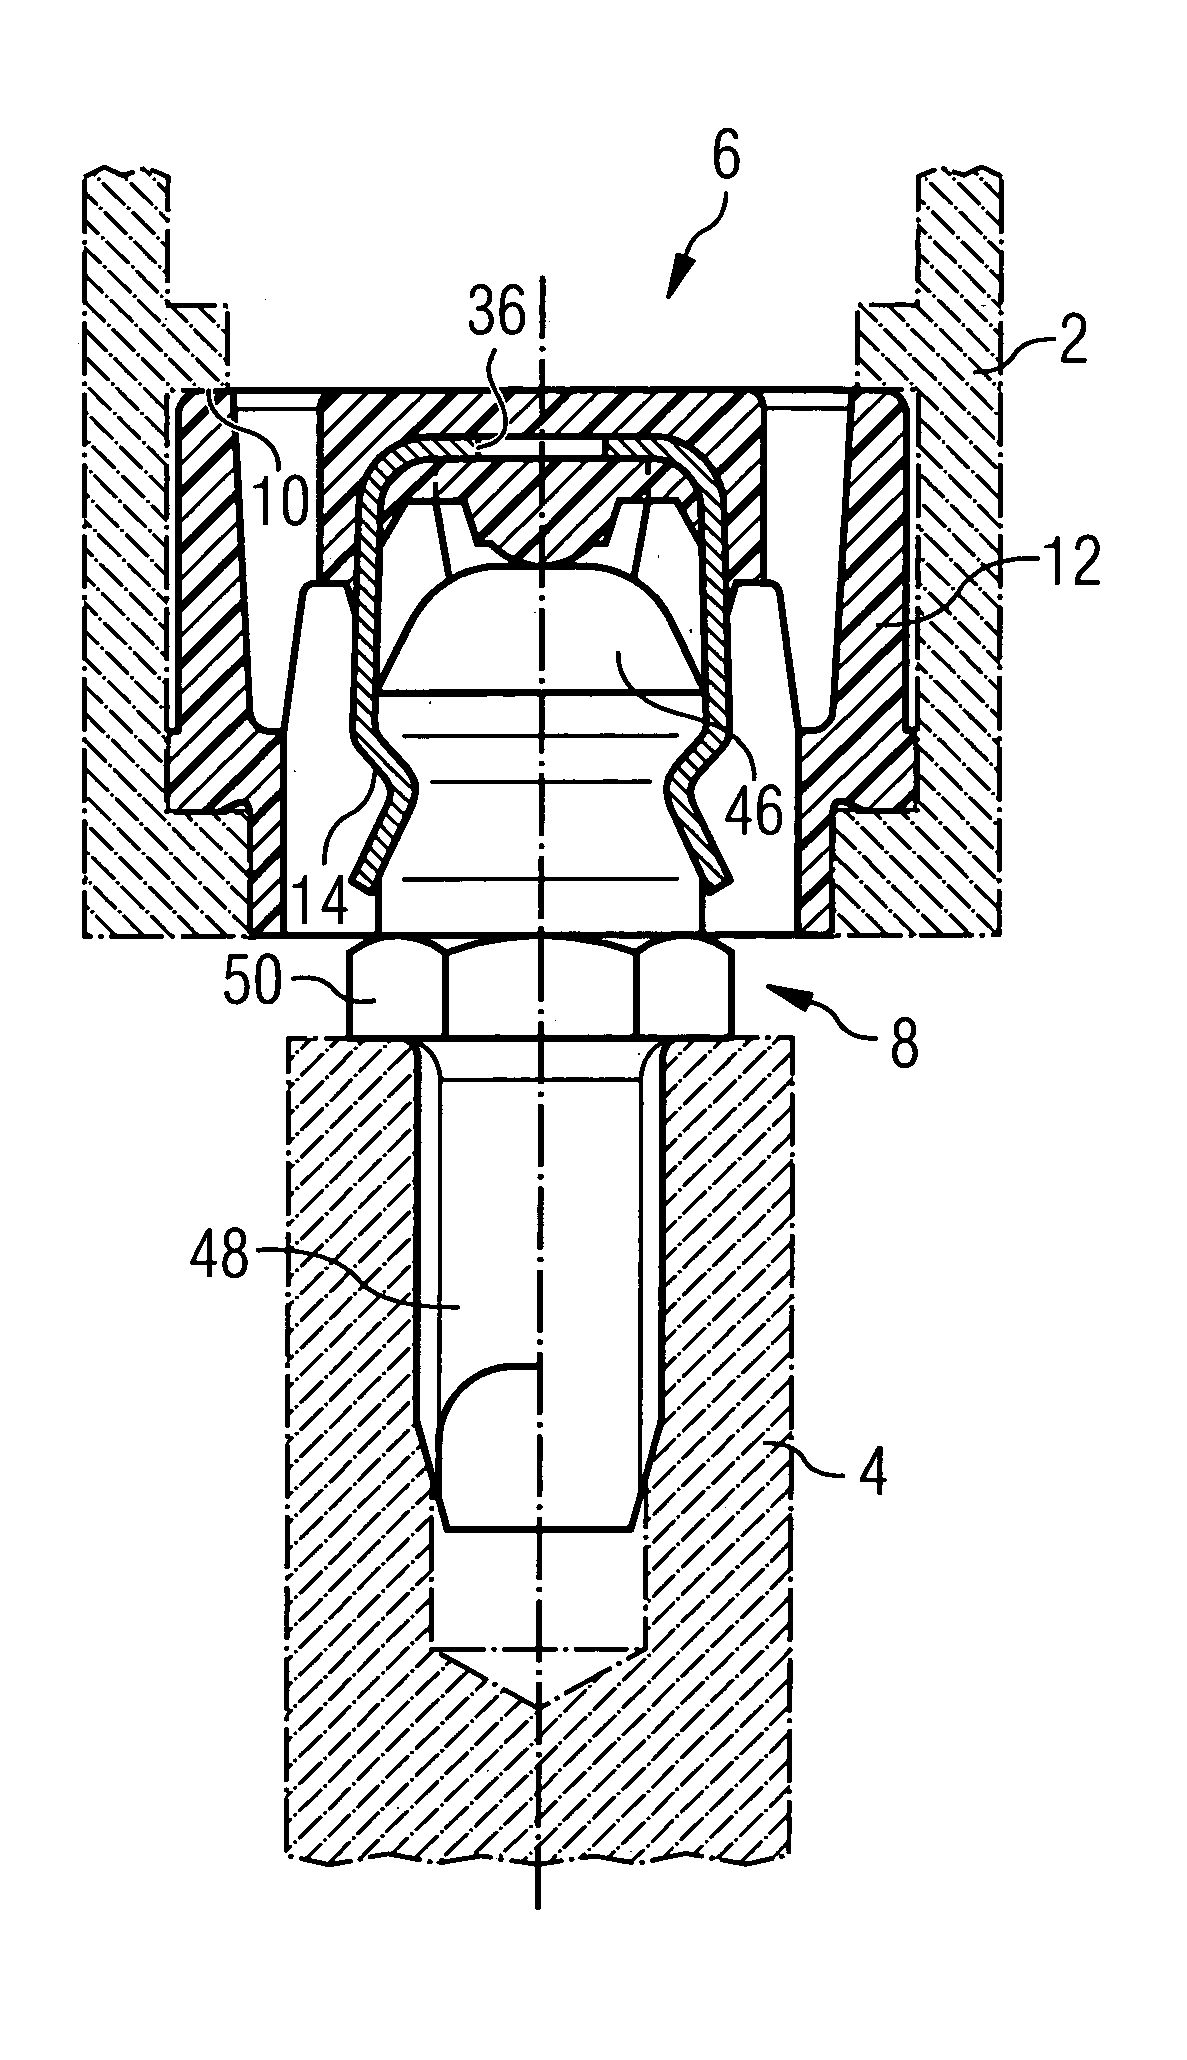 Snap-in coupling comprising a spring clamp